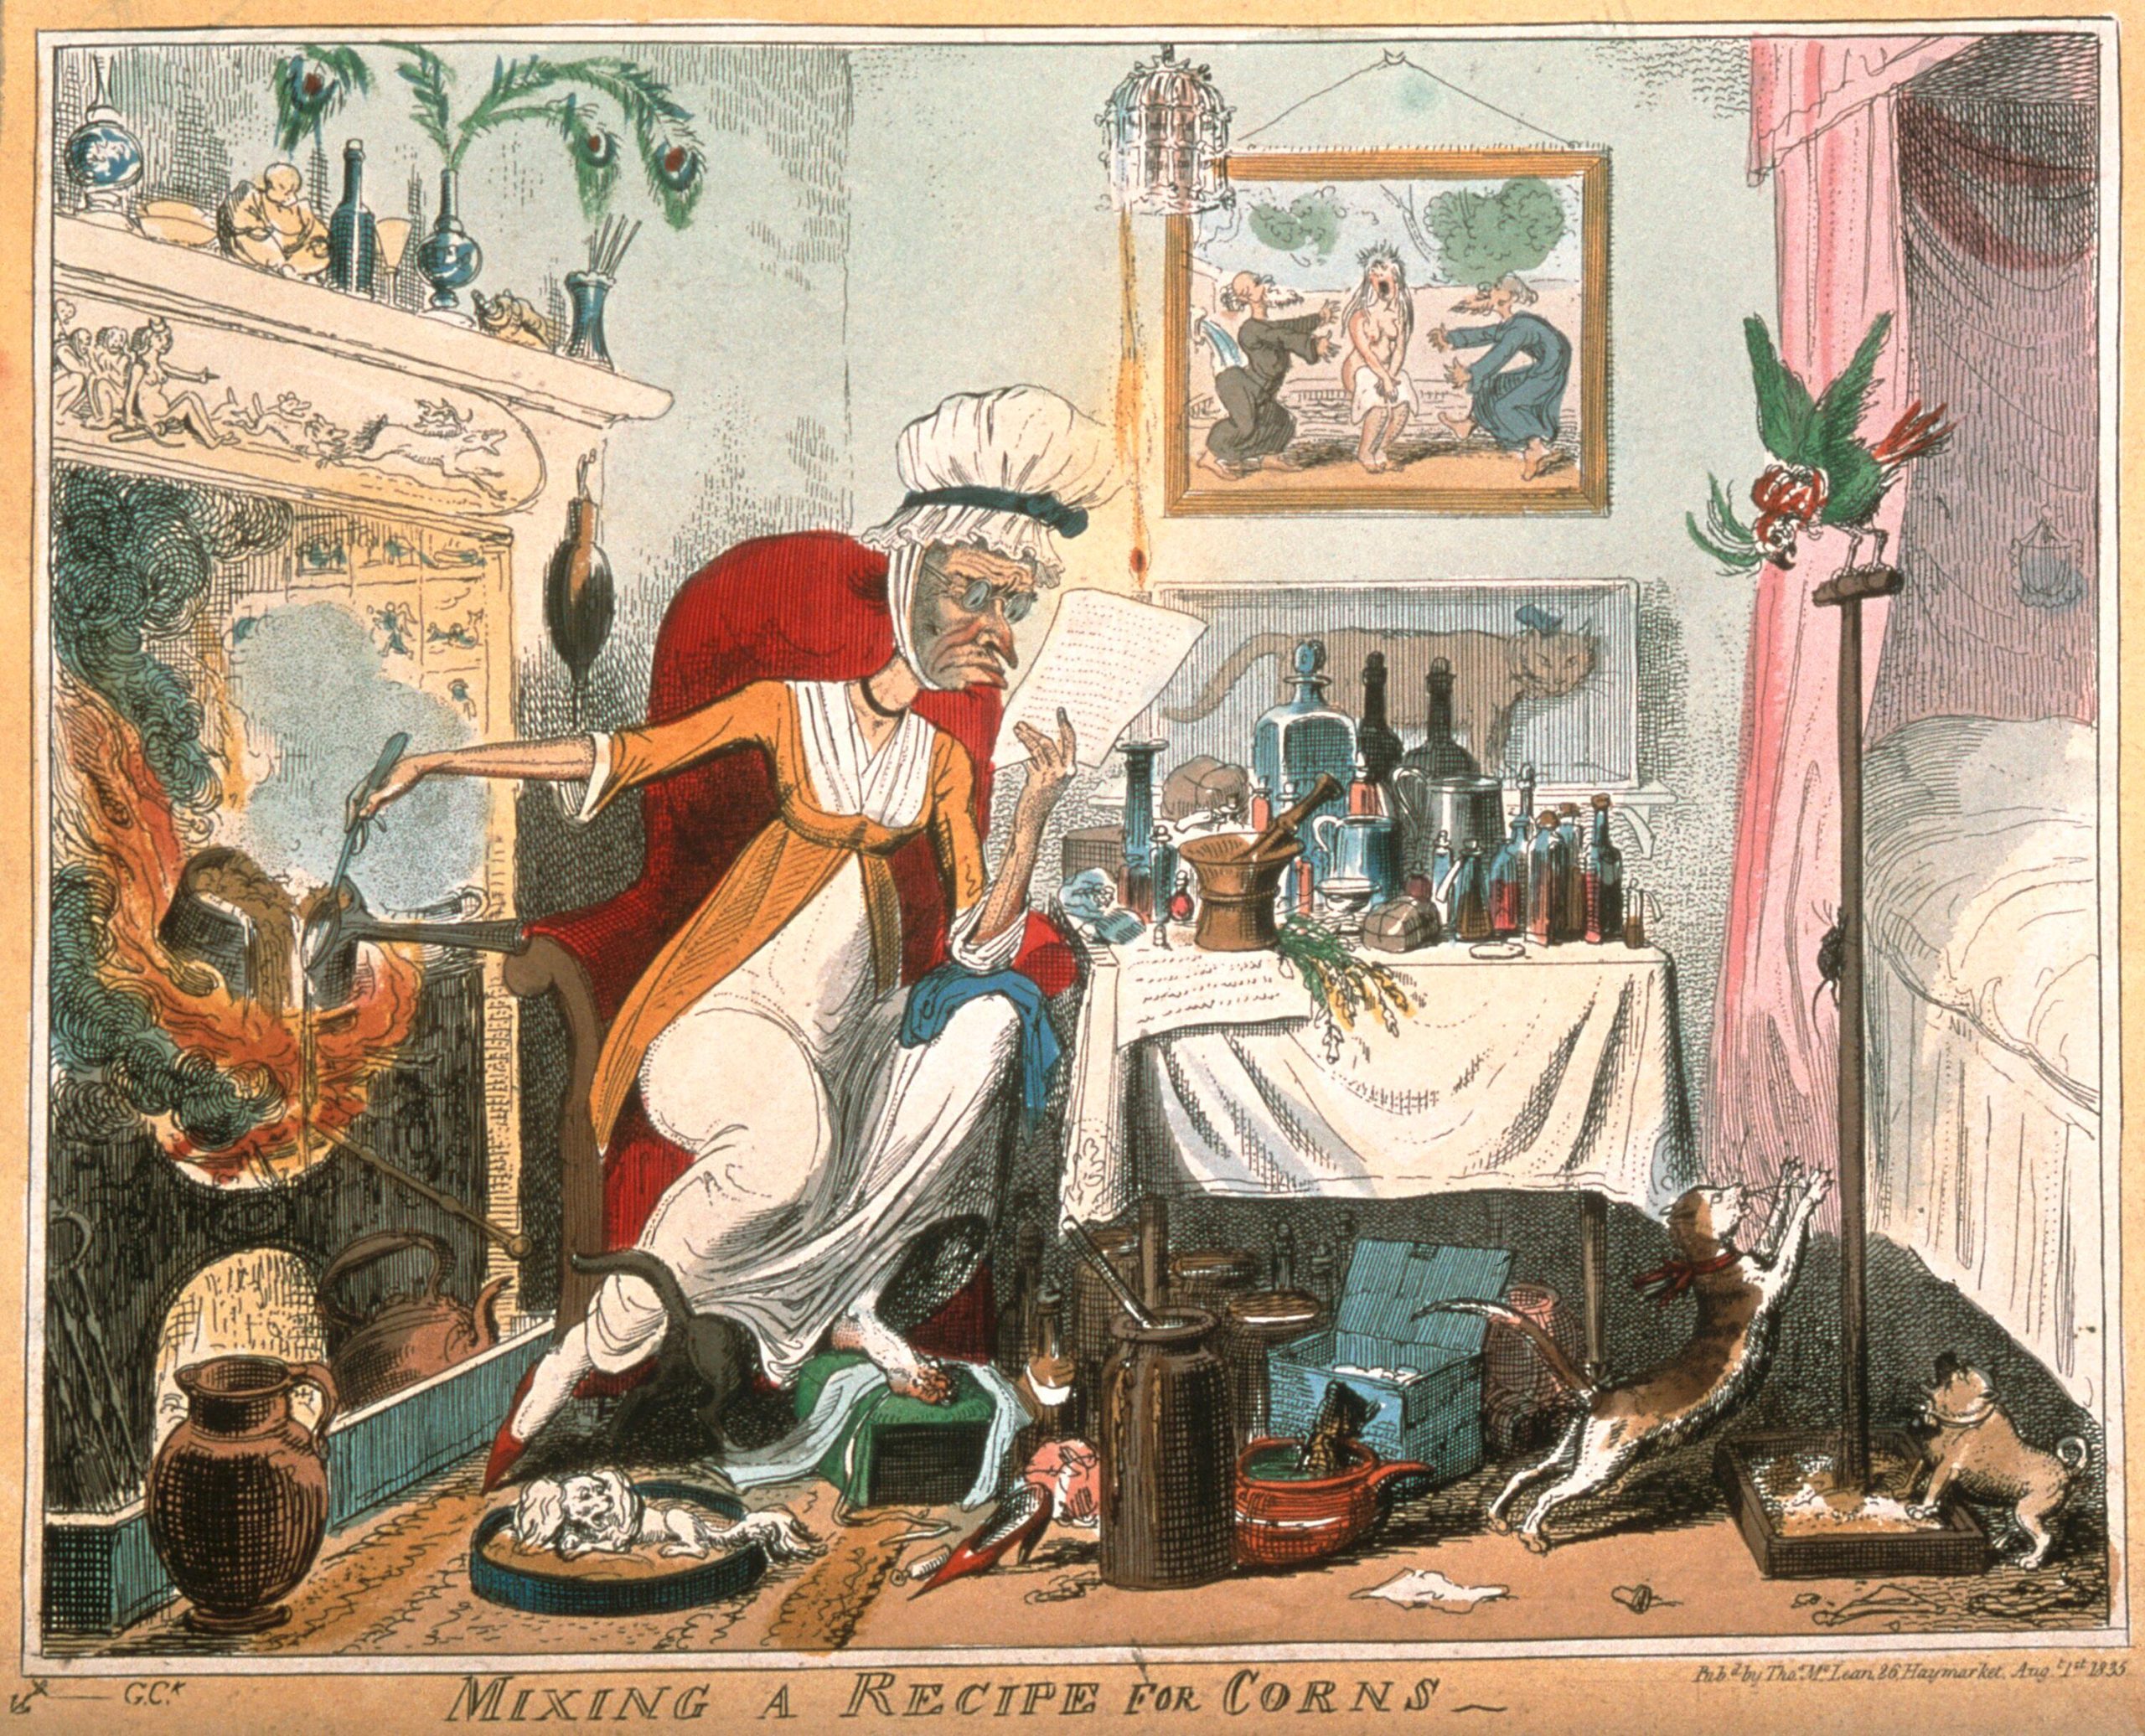 Licence: Public Domain Mark

Credit: A haggard old woman carelessly mixing a recipe for corns on the fire in her sordid bedroom. Etching by G. Cruikshank, 1819, after Captain F. Marryat.

Wellcome Collection.